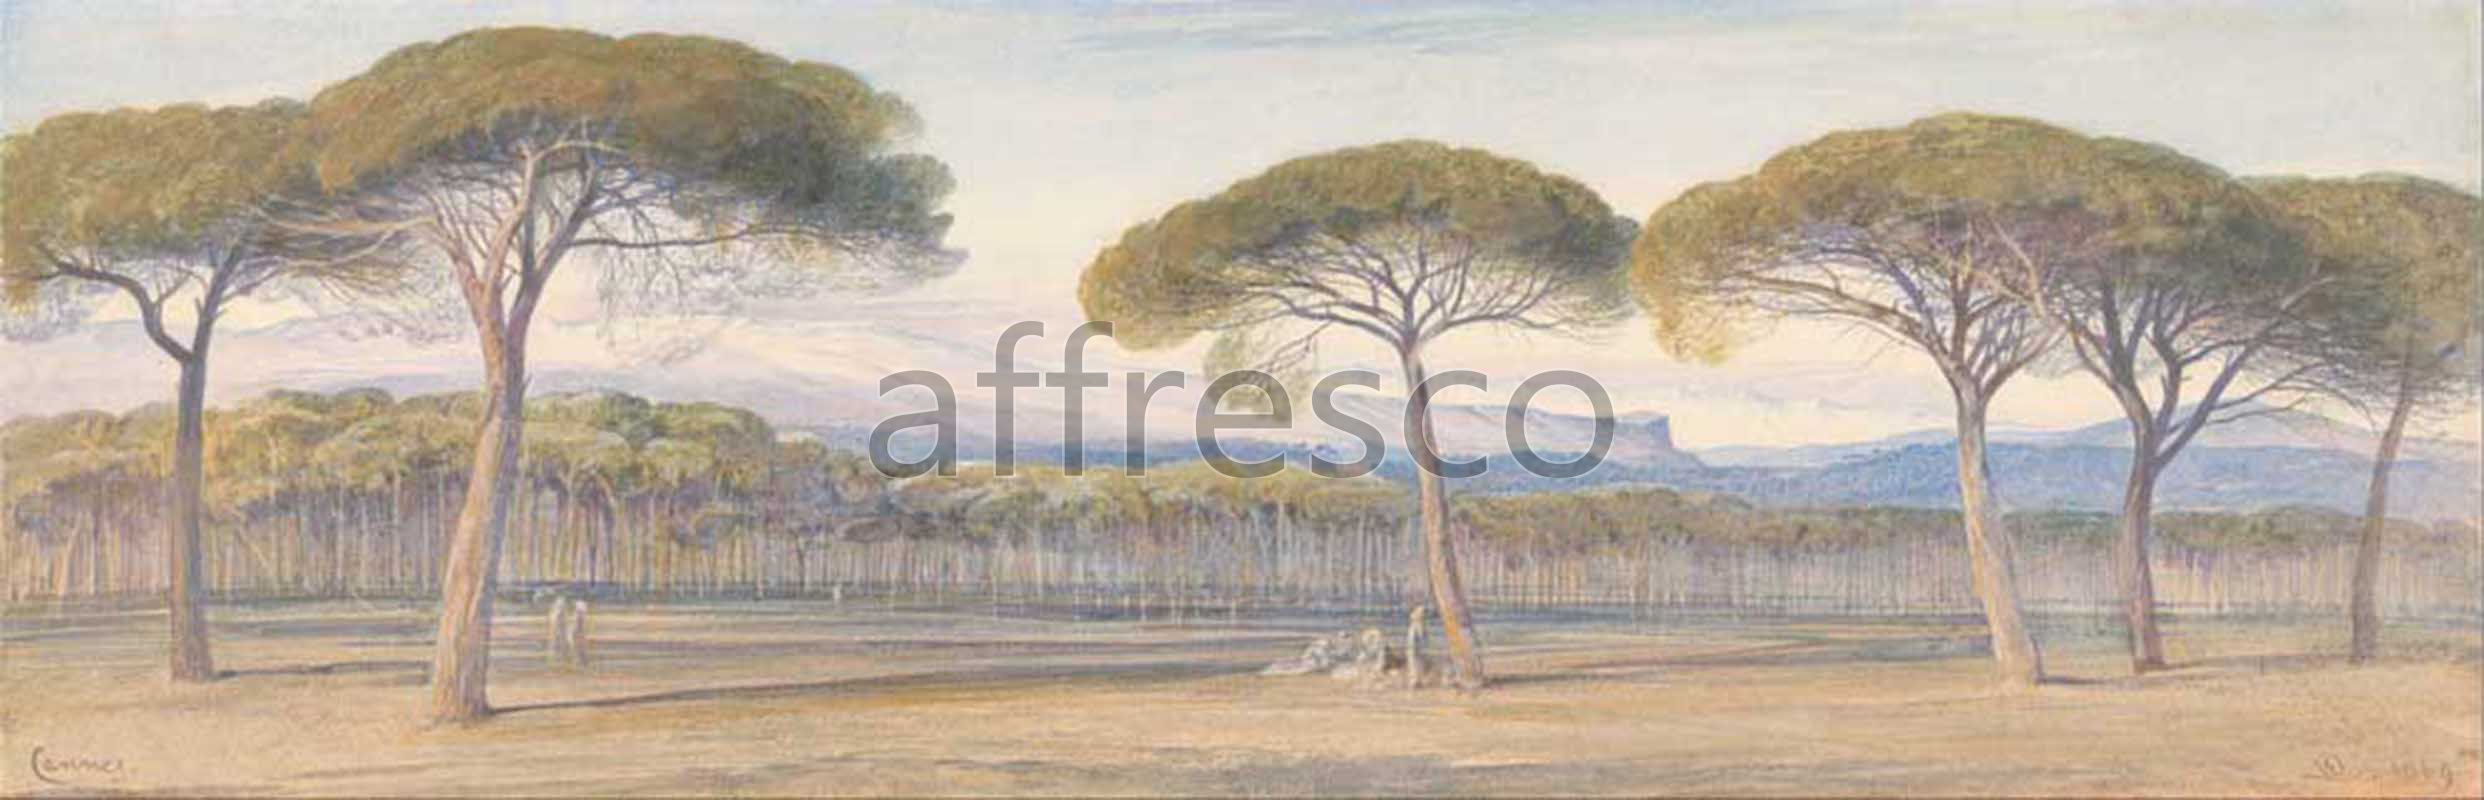 Classic landscapes | Edward Lear A View of the Pine Woods Above Cannes | Affresco Factory